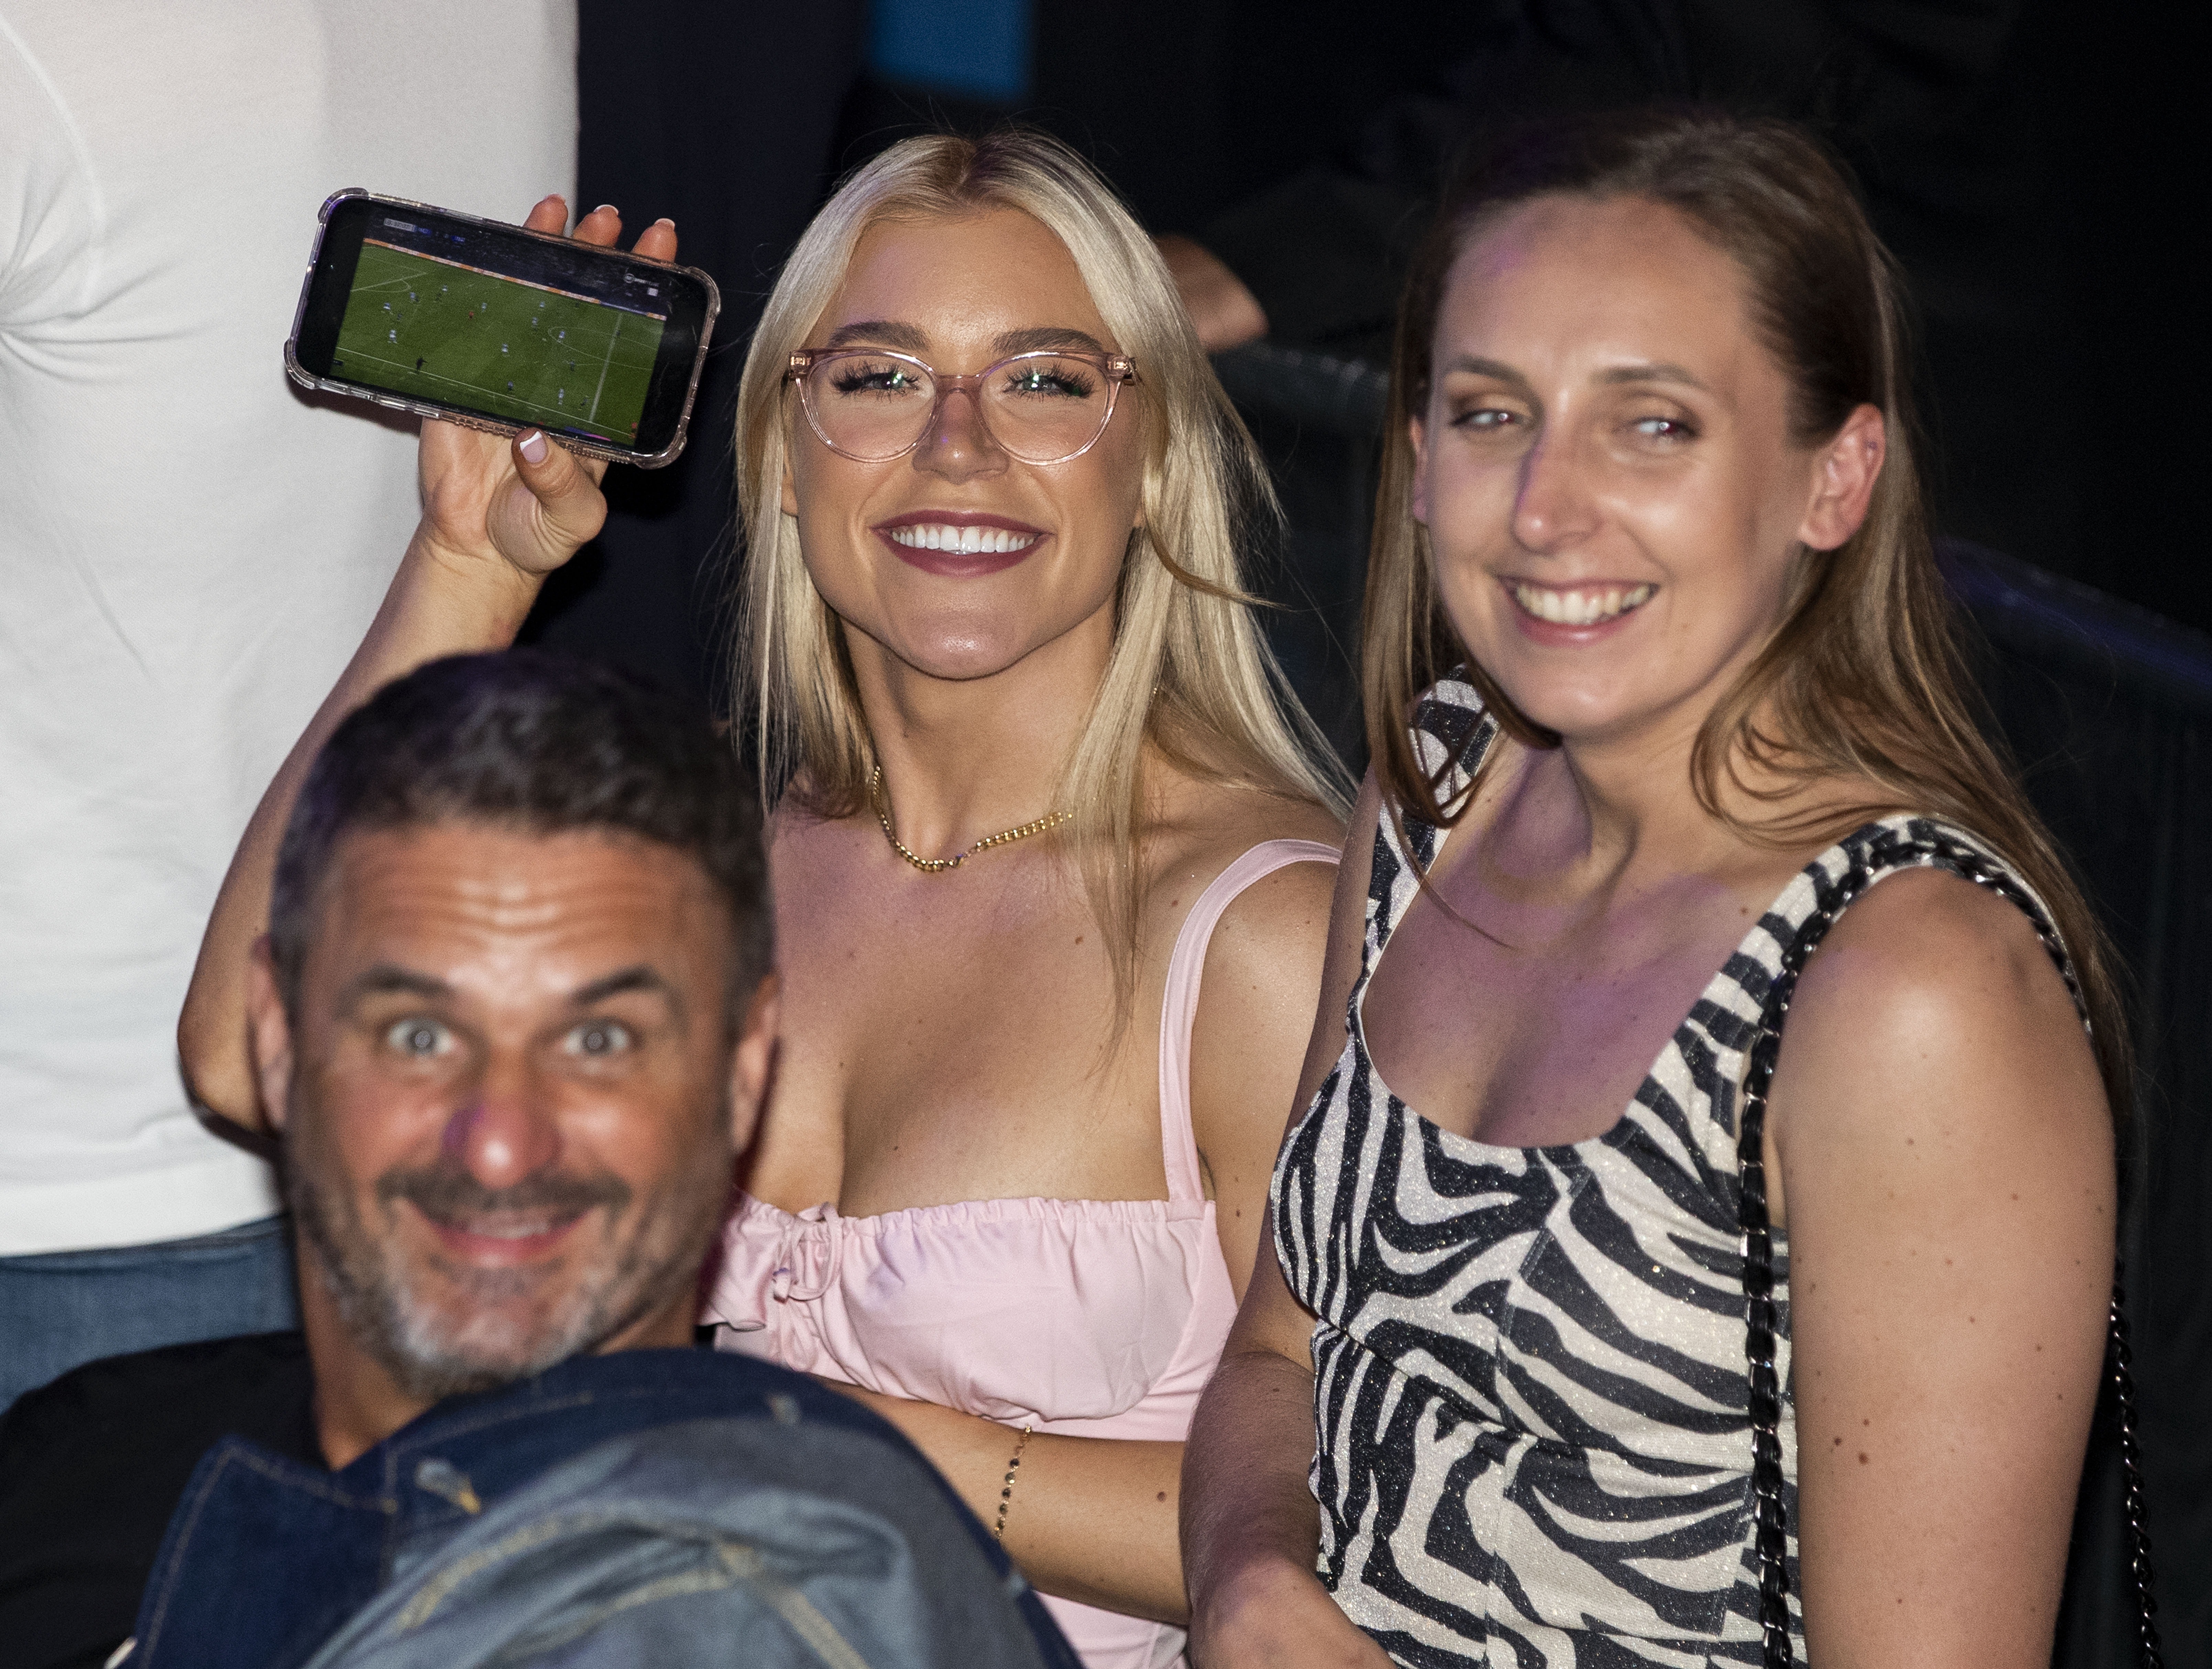 , Elle Brooke joins no bra club as Man City superfan watches treble win on her phone at the boxing